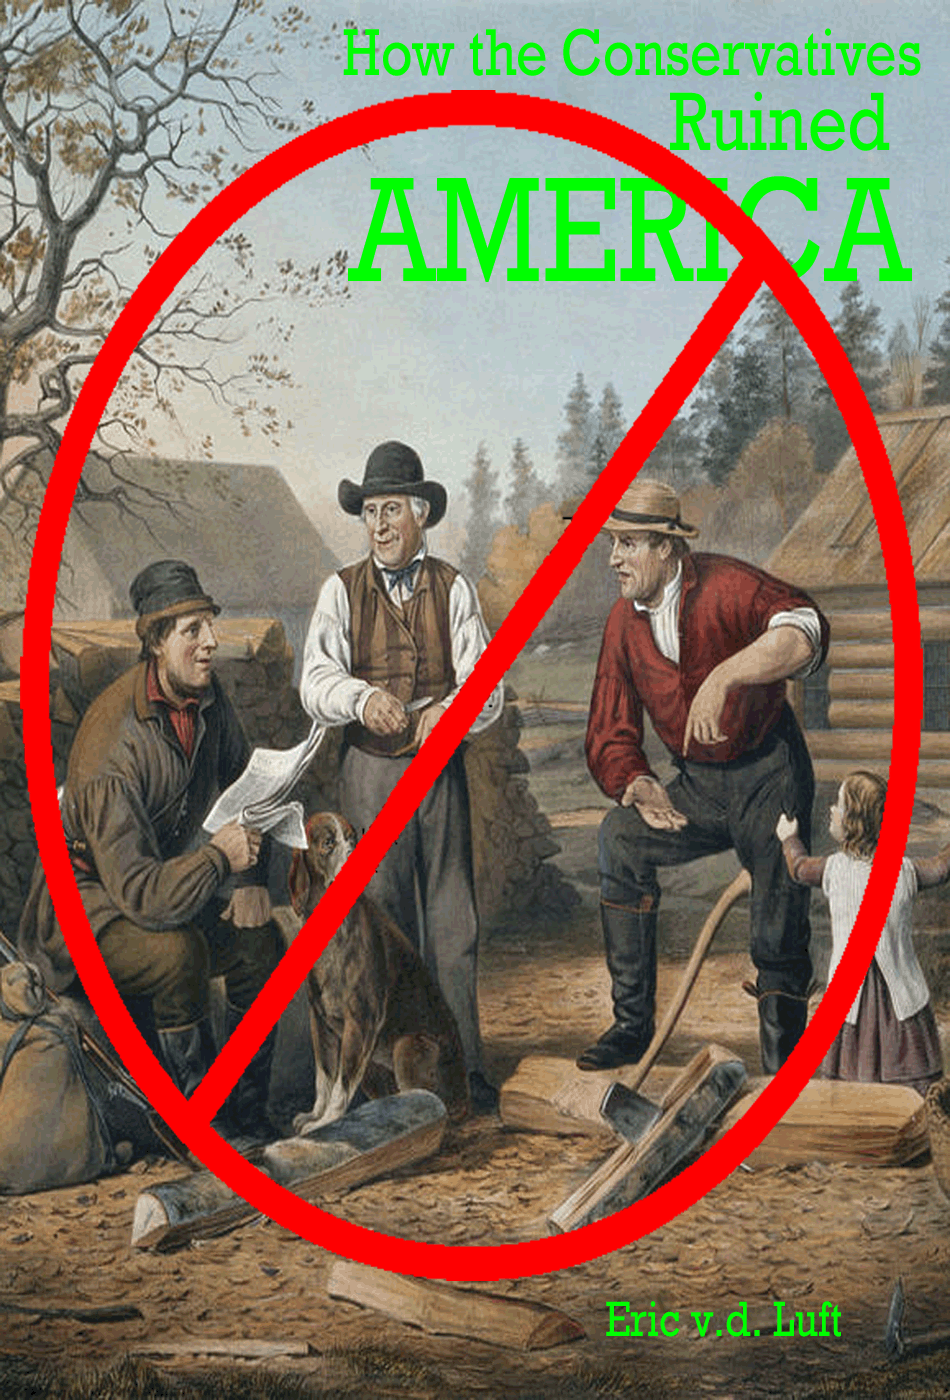 How the Conservatives Ruined America